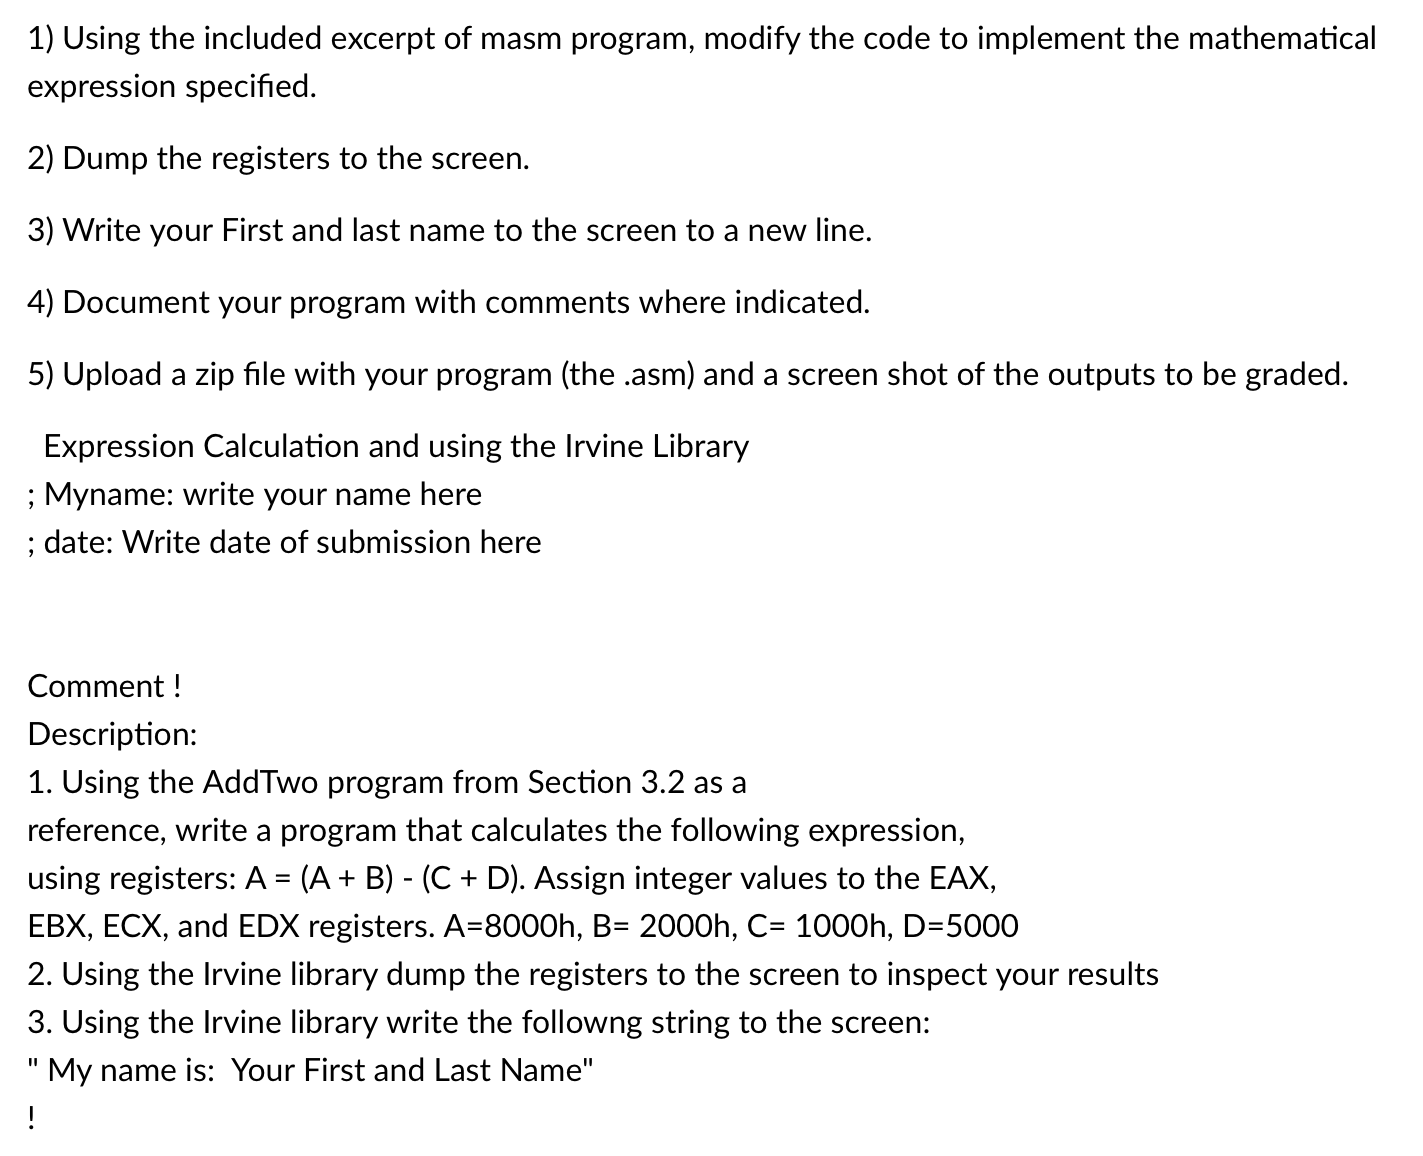 1) Using the included excerpt of masm program, modify the code to implement the mathematical expression